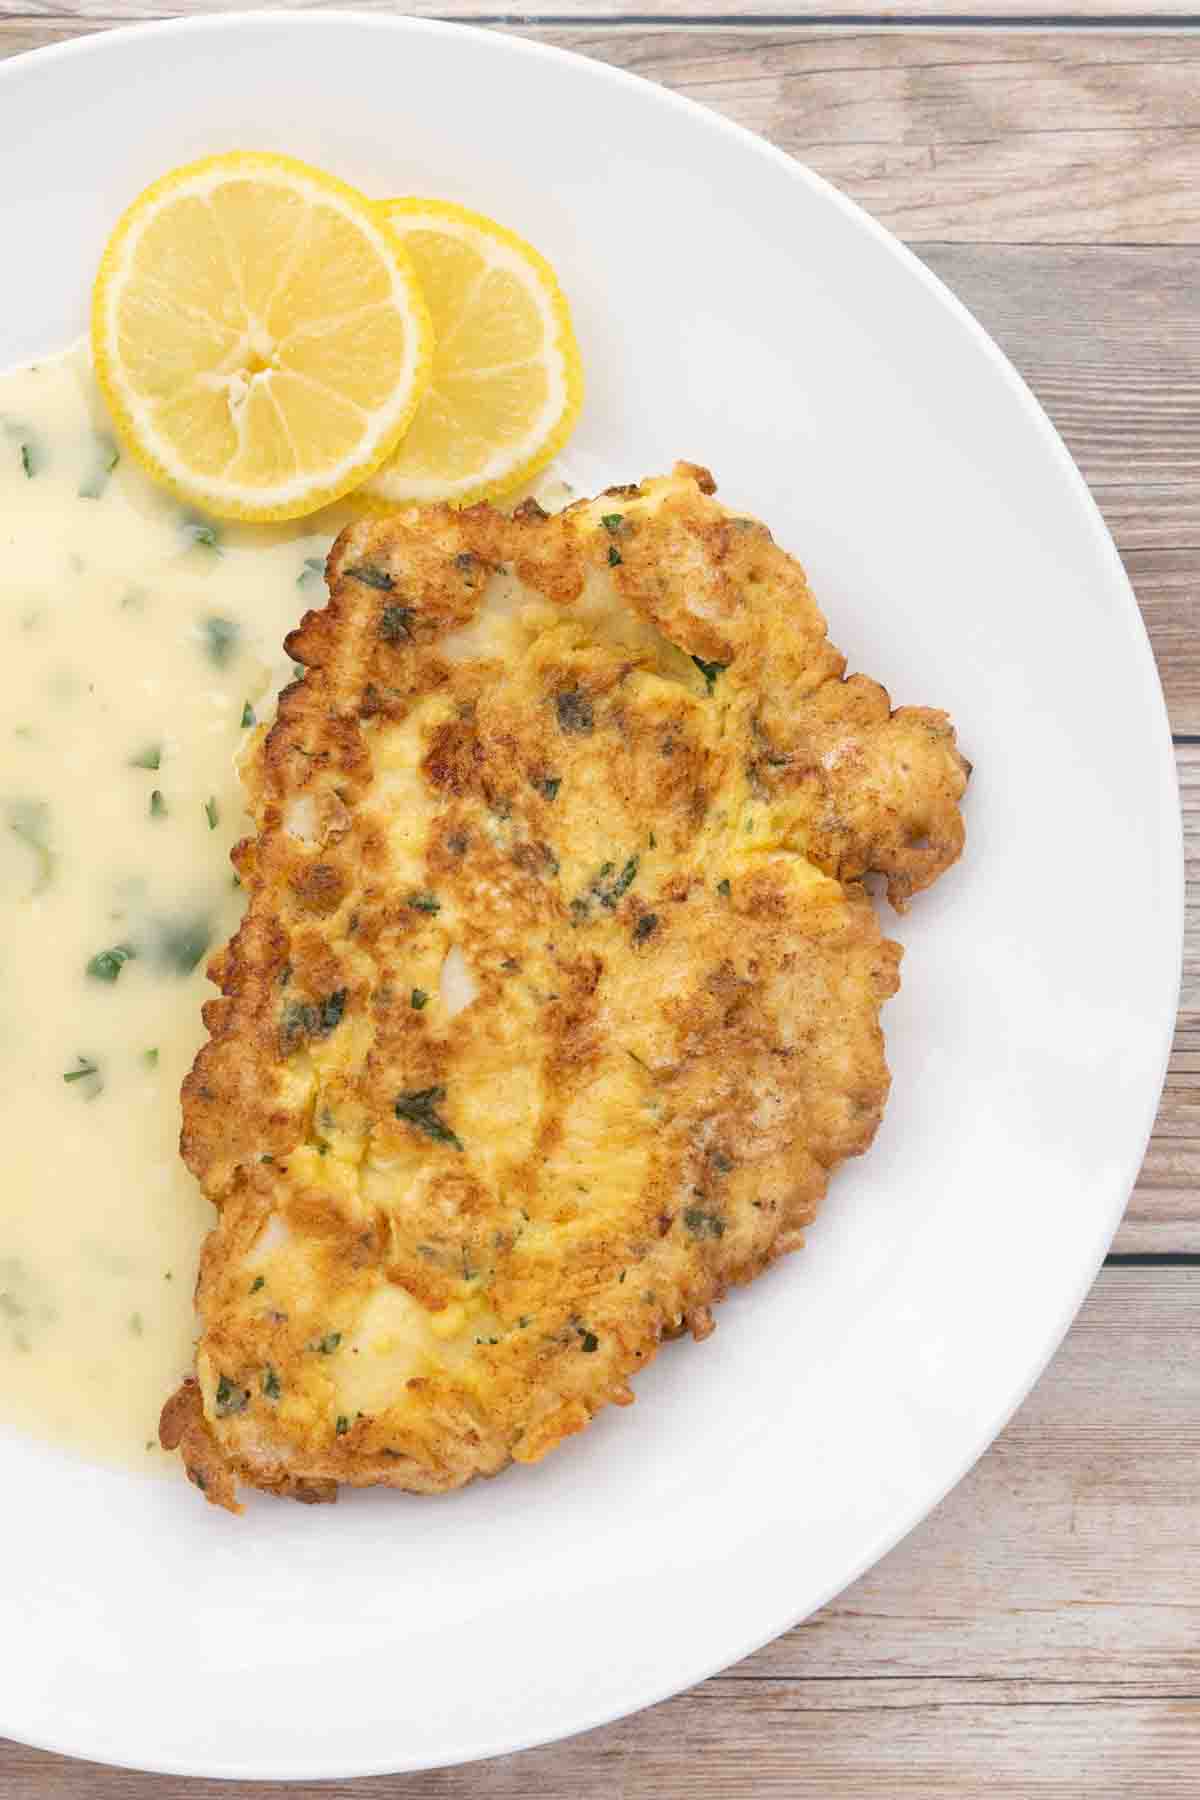 chicken francaise with lemon butter sauce on white plate.